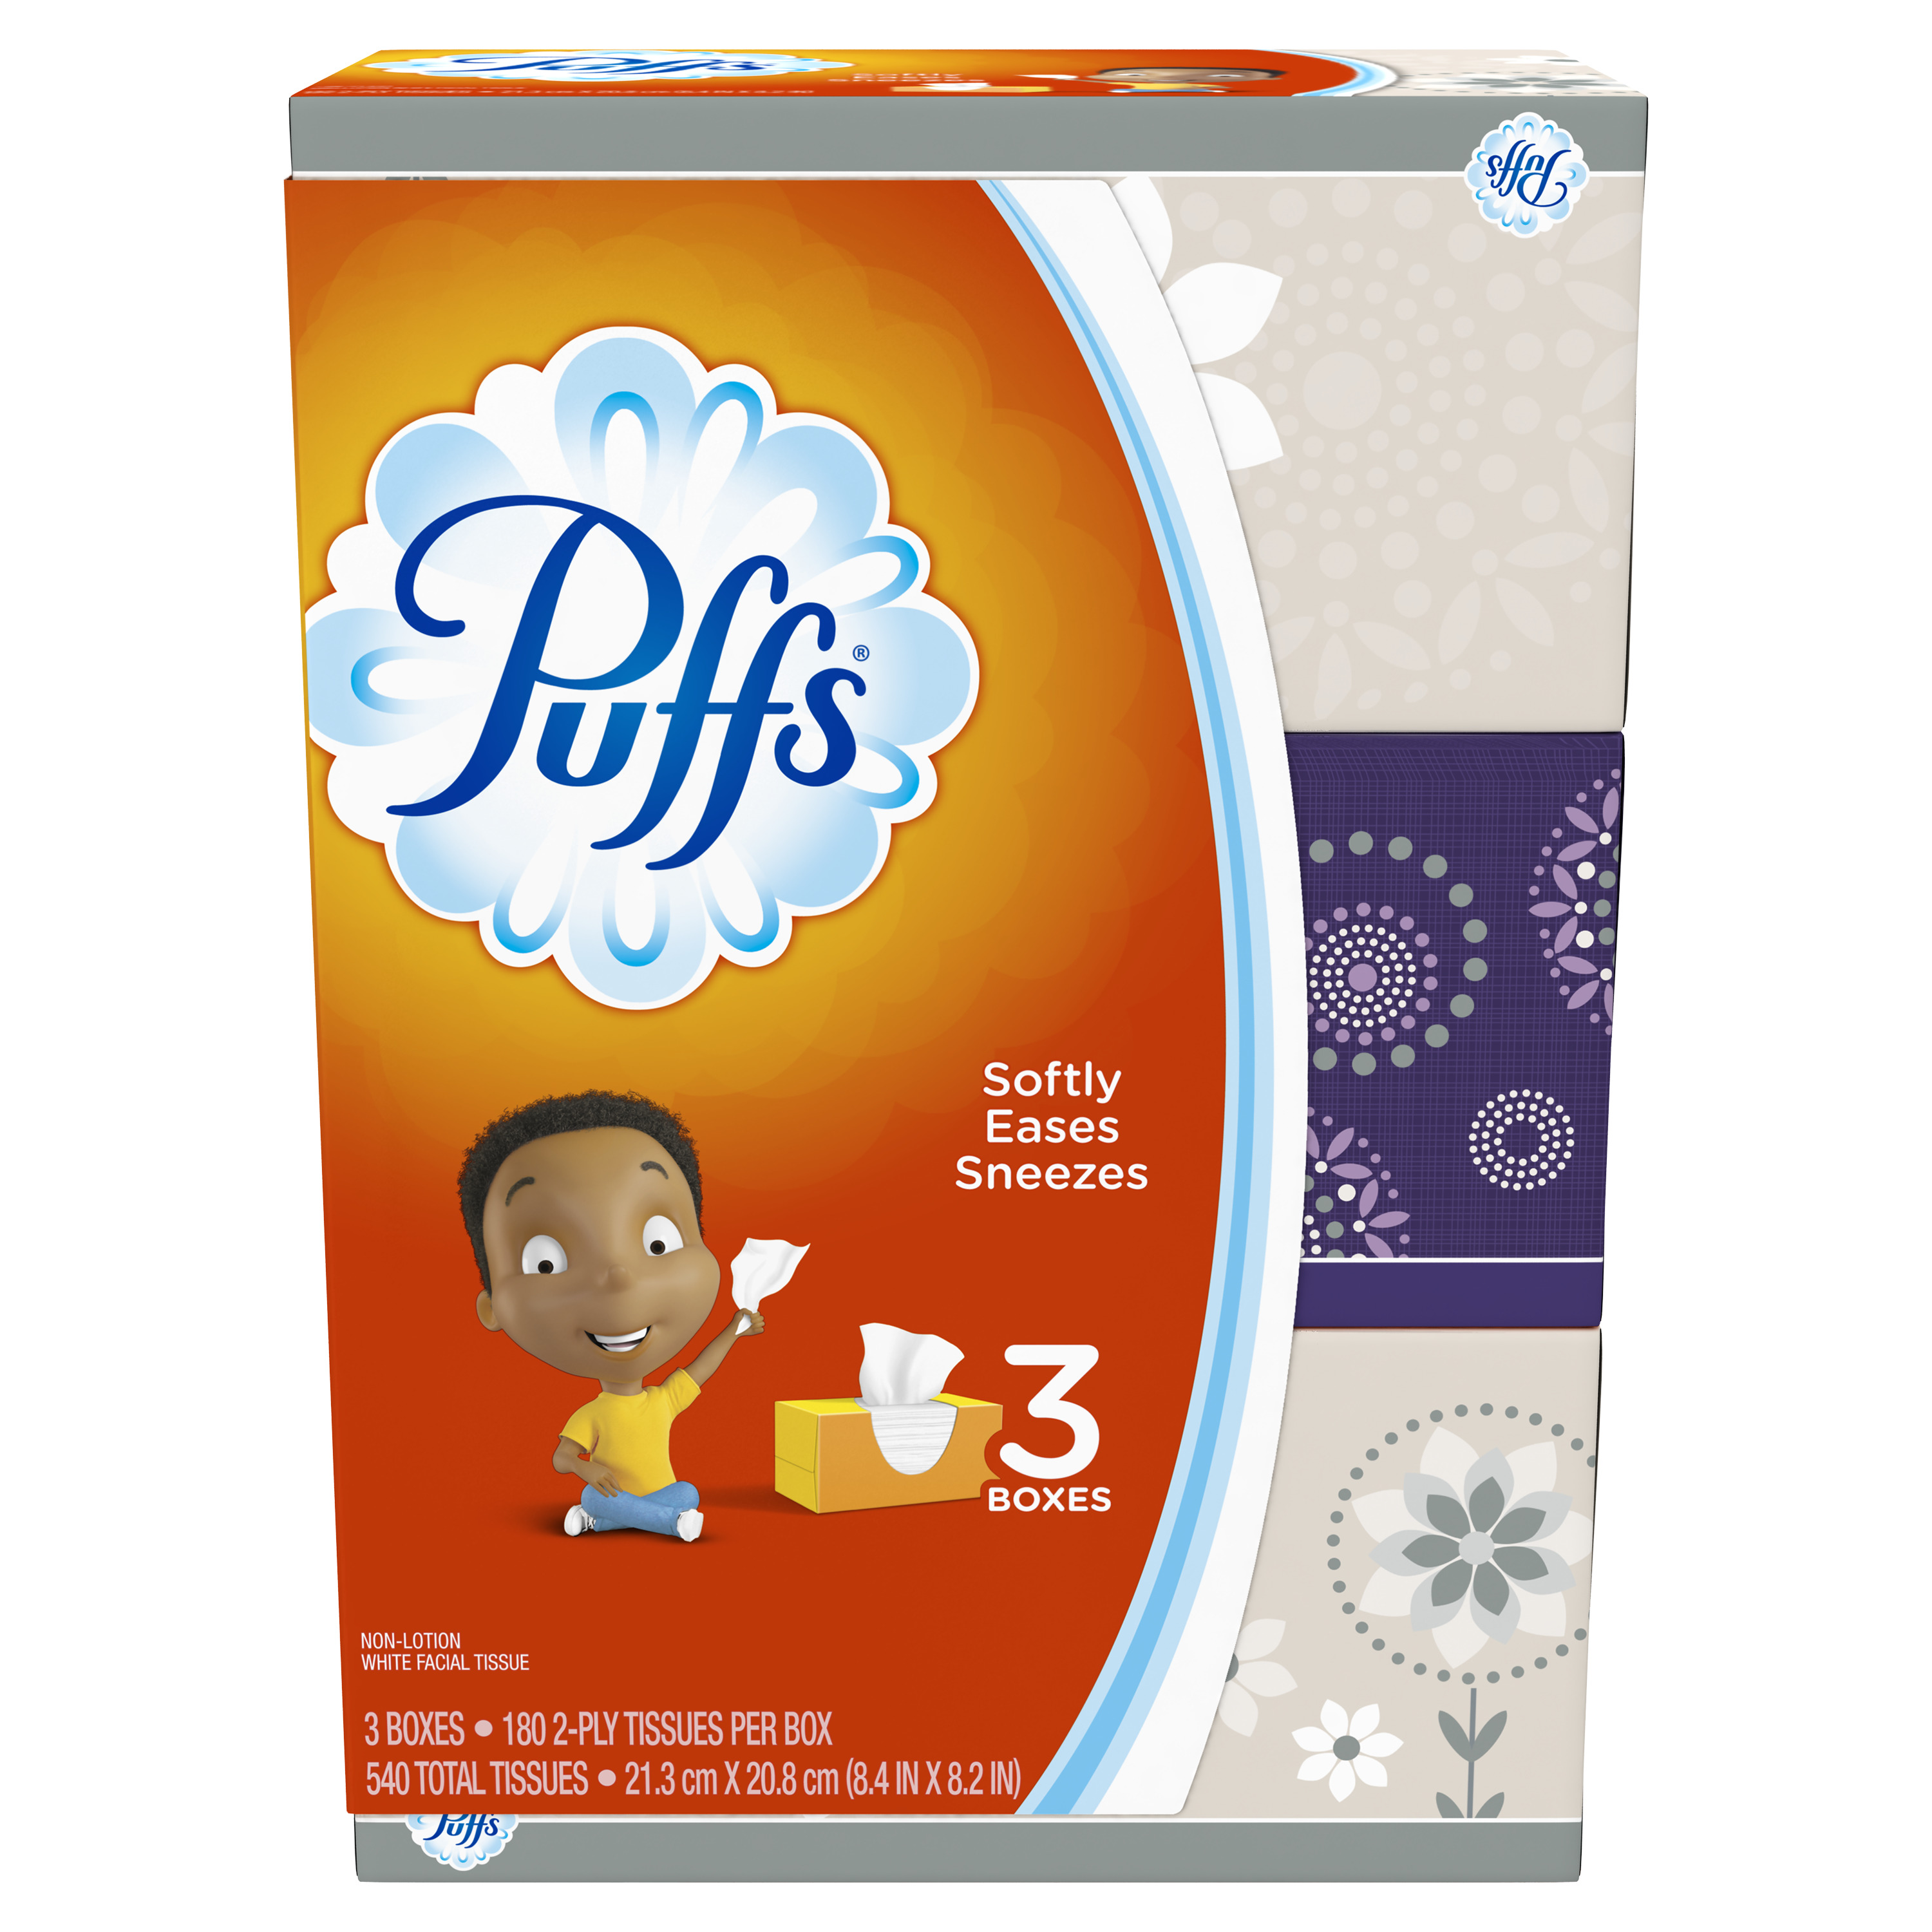 Puffs, Everyday Non-lotion Facial Tissues, 3 Family Boxes, 180 Tissues per Box - image 1 of 10